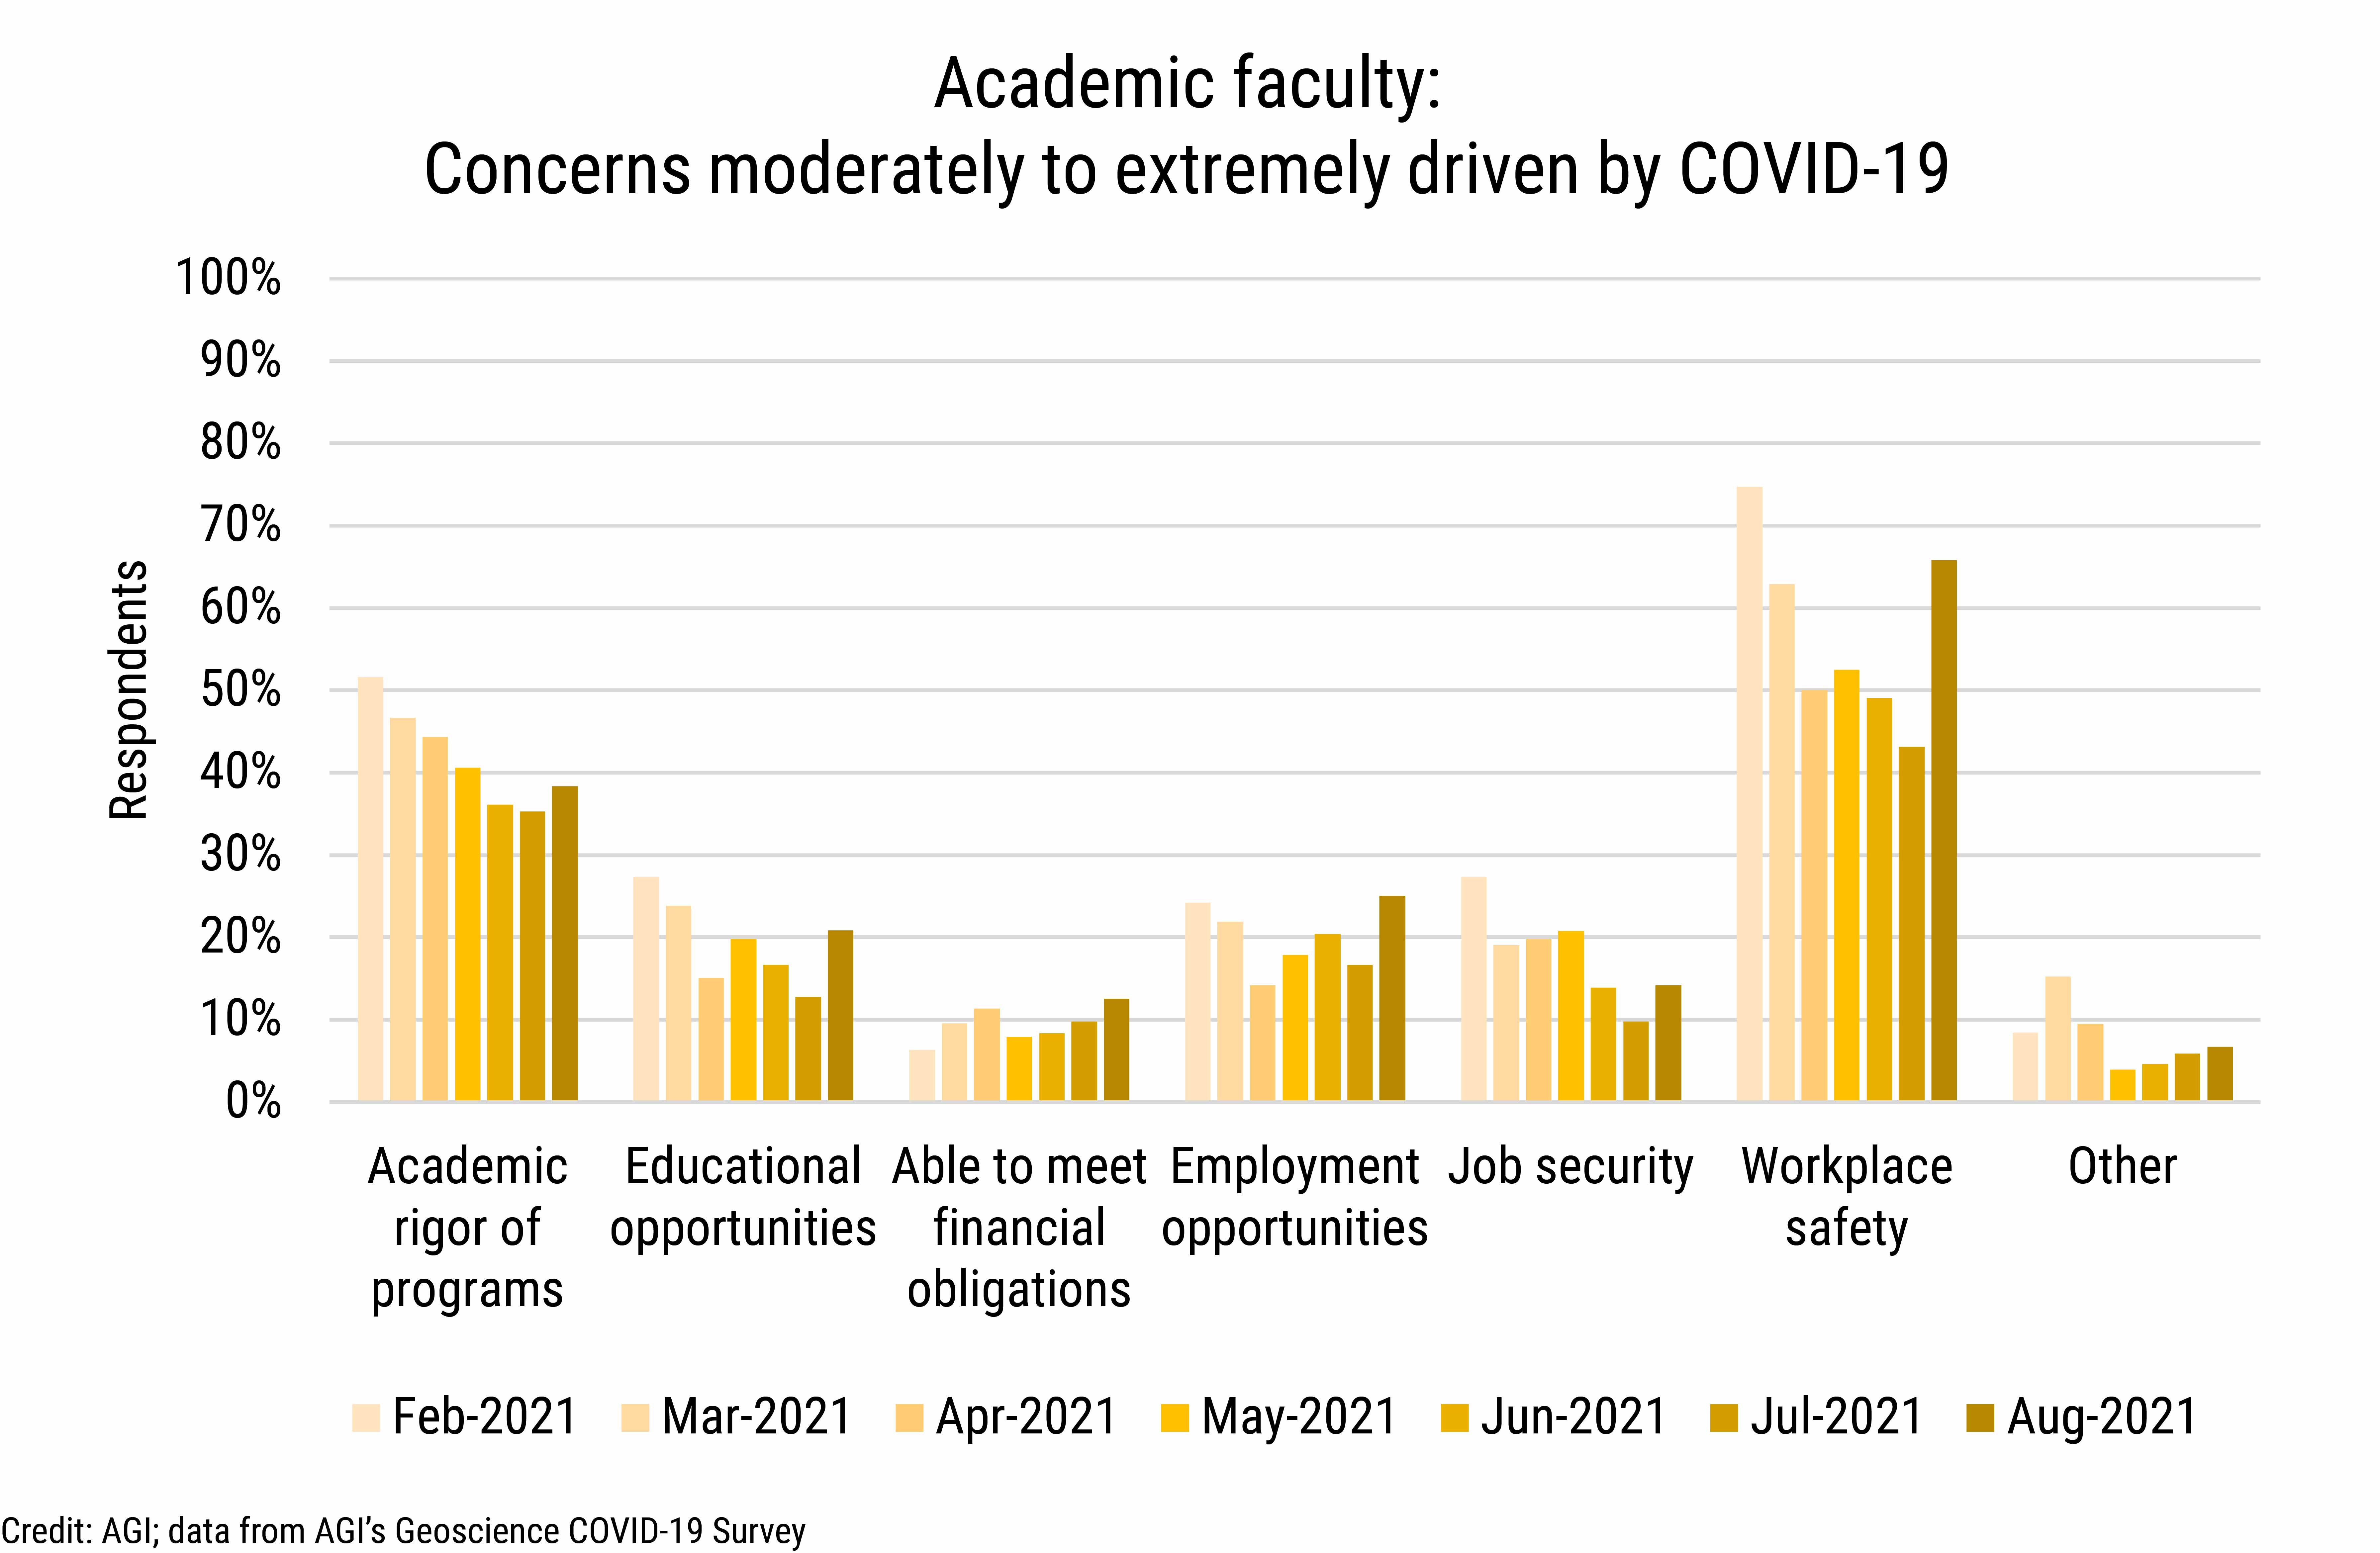 DB_2021-031 chart 07: Academic faculty: Concerns moderately to extremely driven by COVID-19 (Credit: AGI; data from AGI's Geoscience COVID-19 Survey)